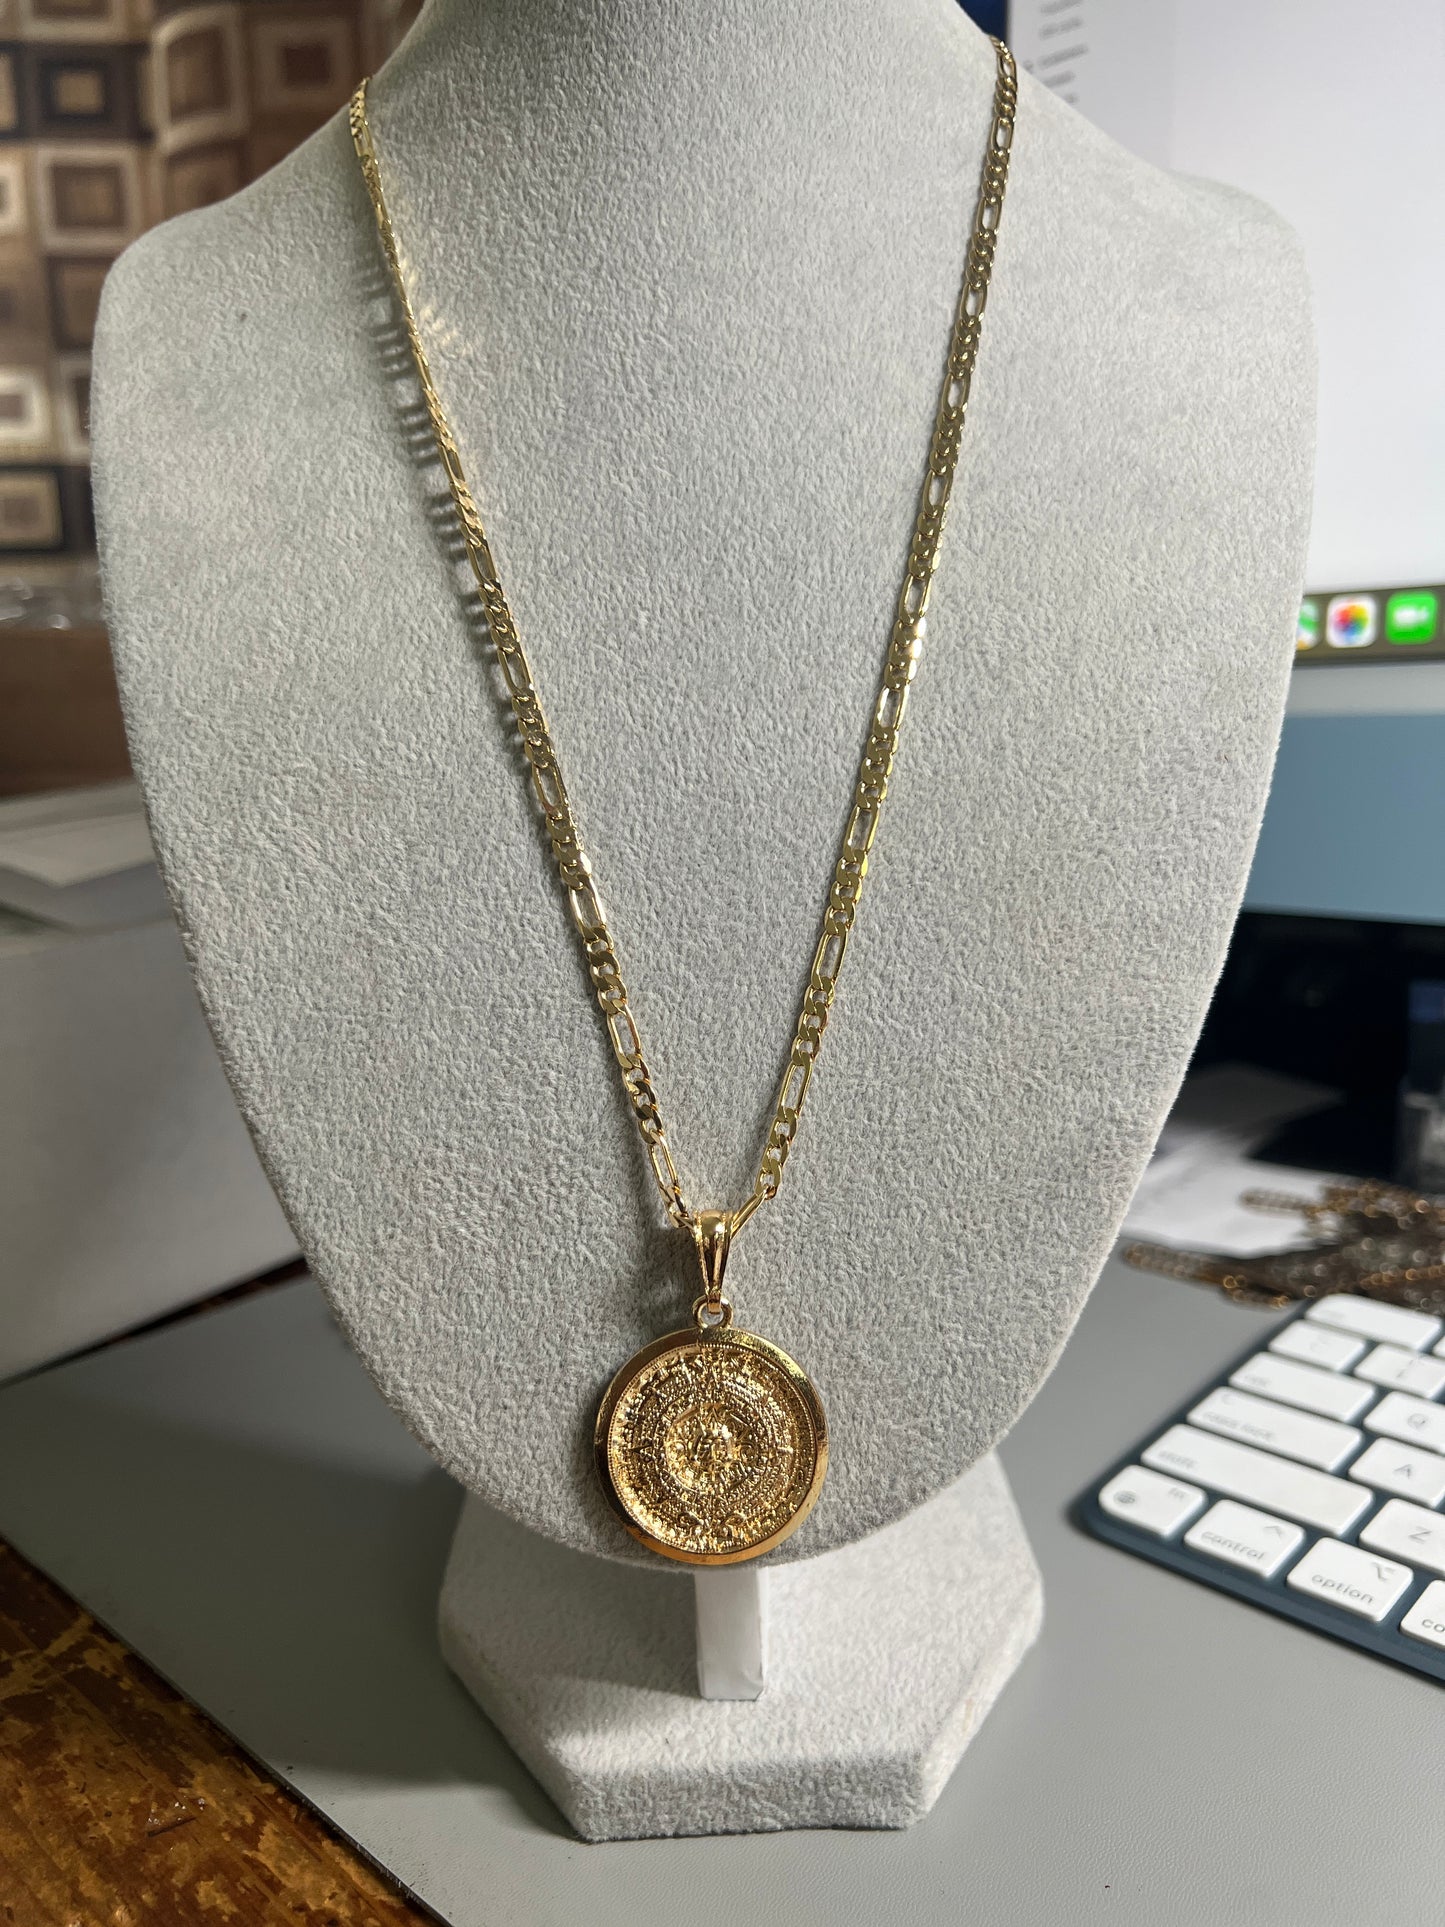 Gold Plated Aztec Calendar Pendant Necklace Chain, Figaro, Mexico, Handmade (#19)